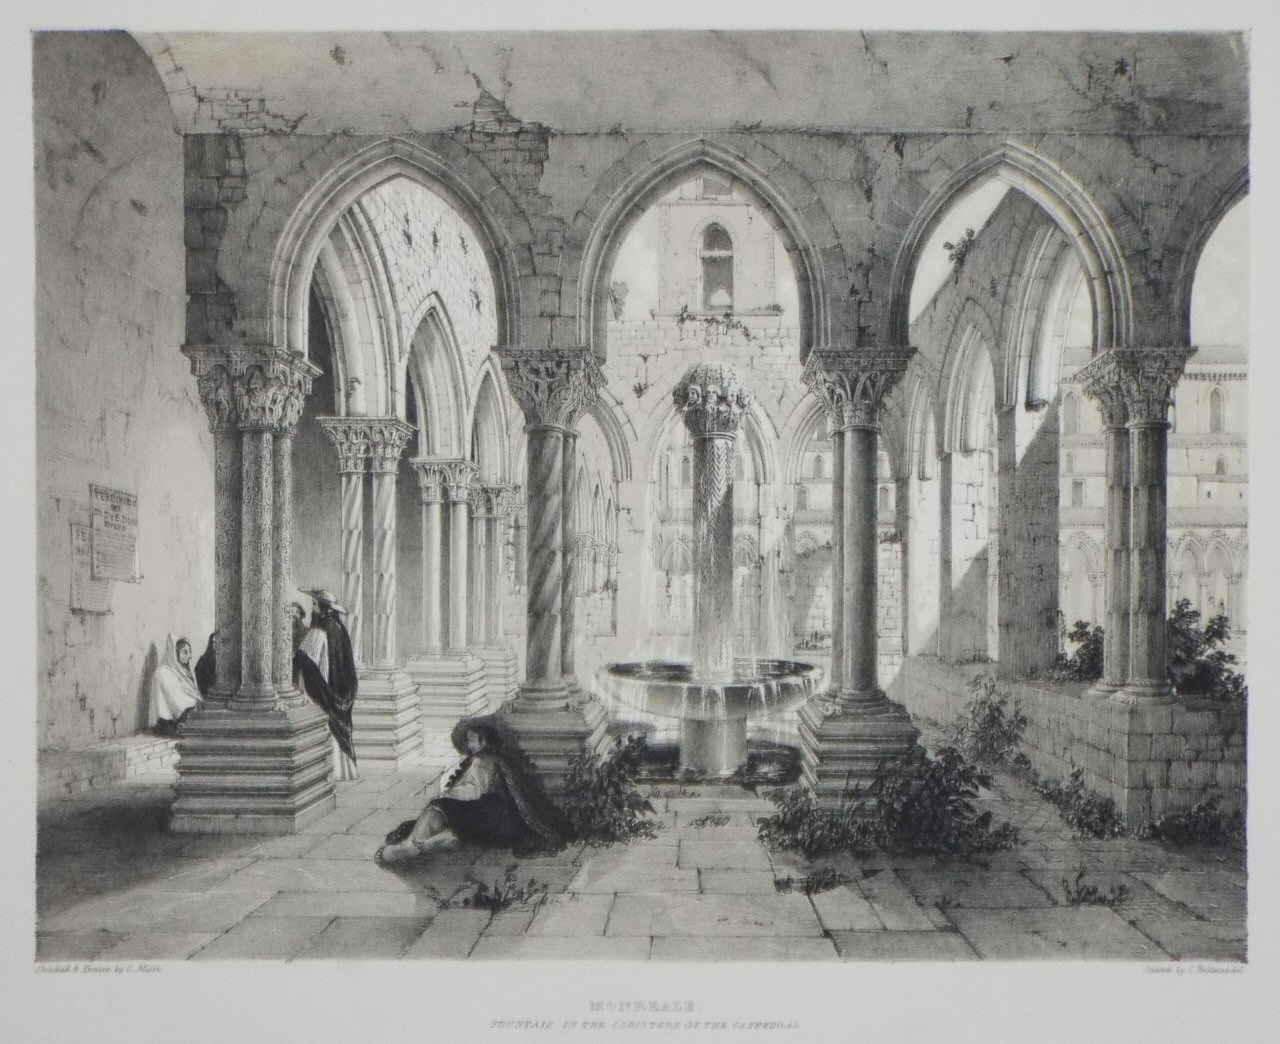 Lithograph - Monreale. Fountain in the Cloisters of the Cathedral. - Moore